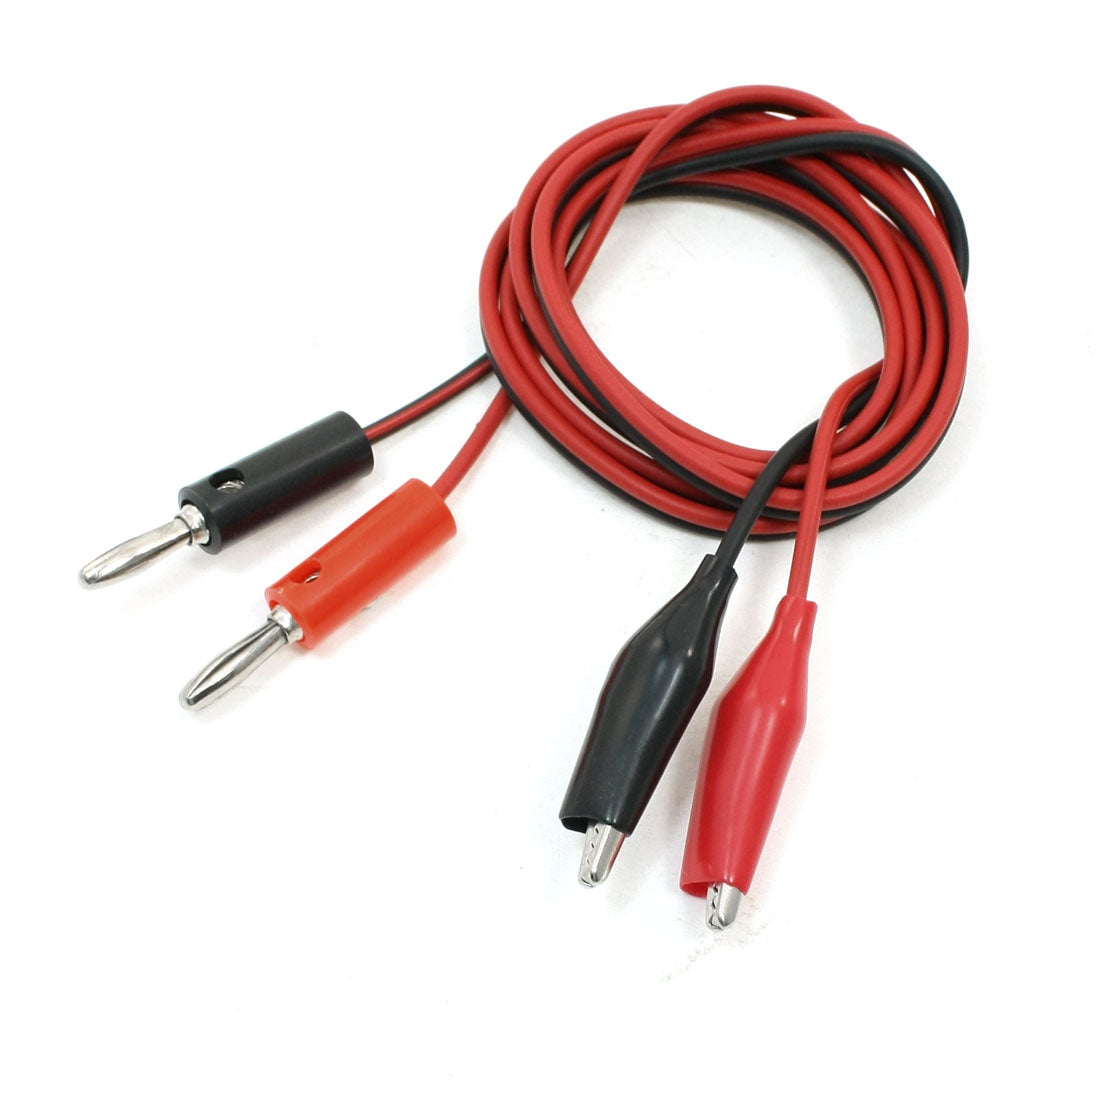 uxcell Uxcell Alligator Clip Test Lead to Banana Connector Line Cable 1M Black Red